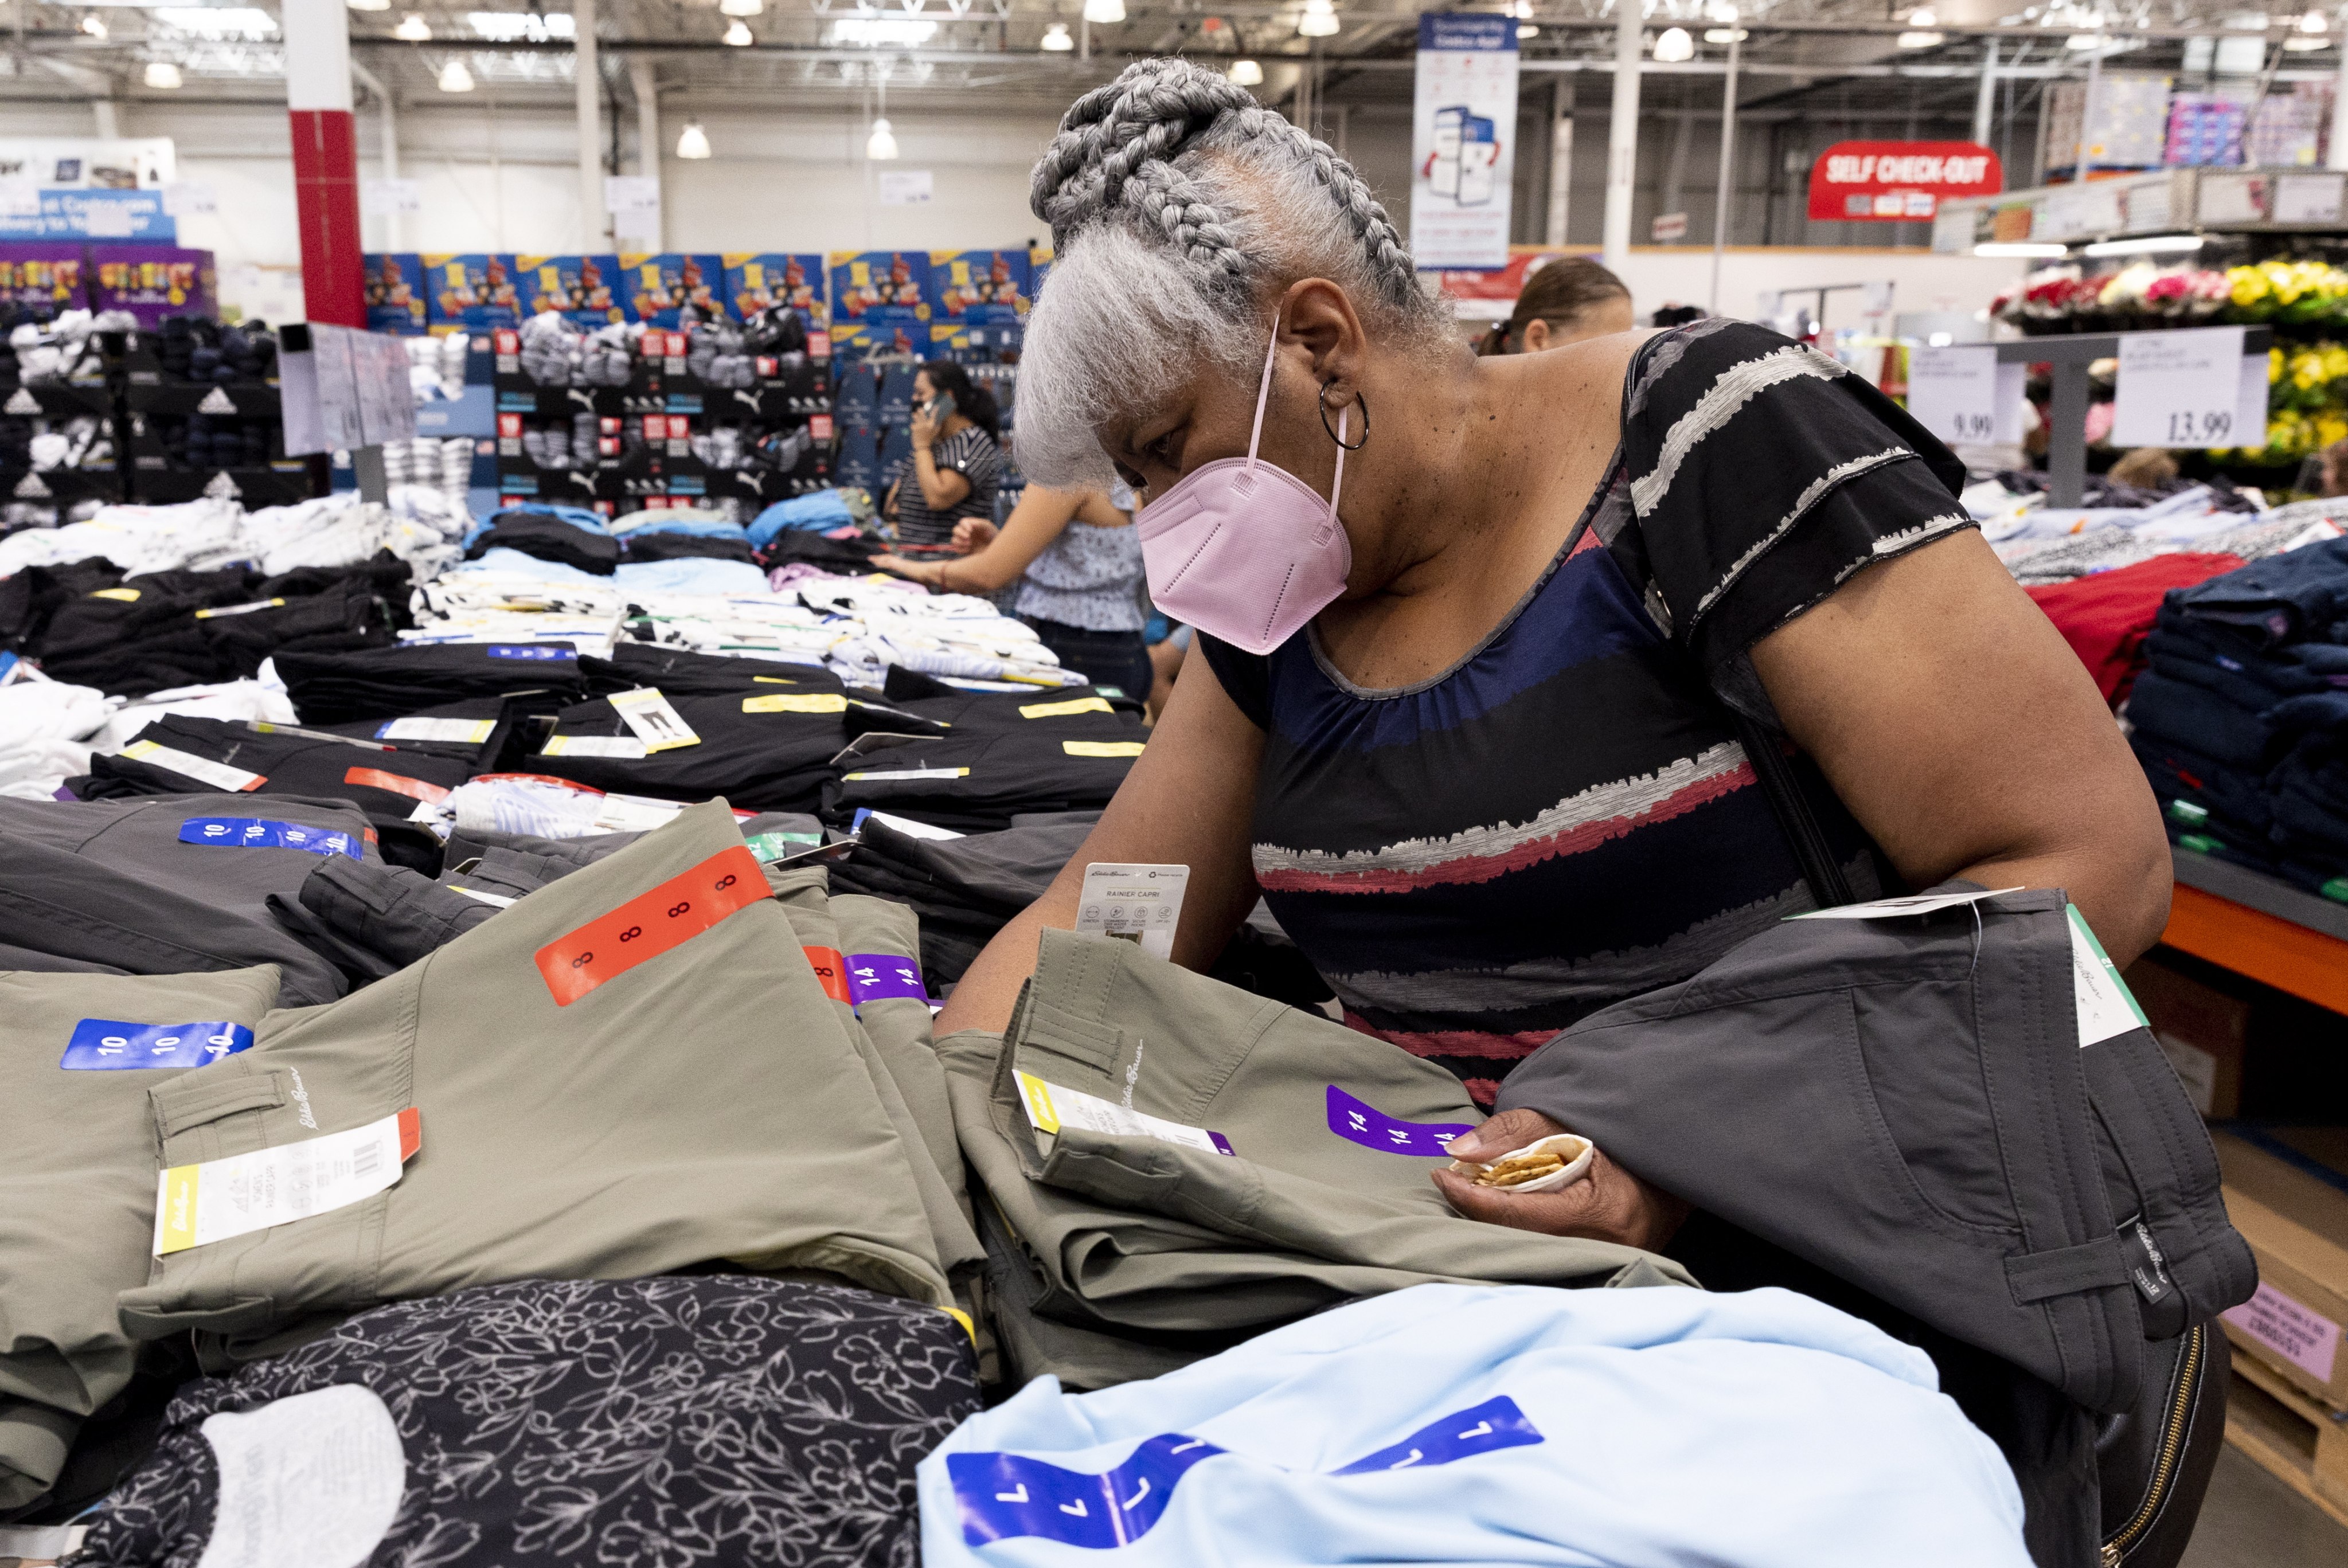 Customers look at clothing, some produced in China, at a Costco in Washington on July 6. The first wave of Trump-era tariffs on Chinese goods began four years ago. Photo: EPA-EFE